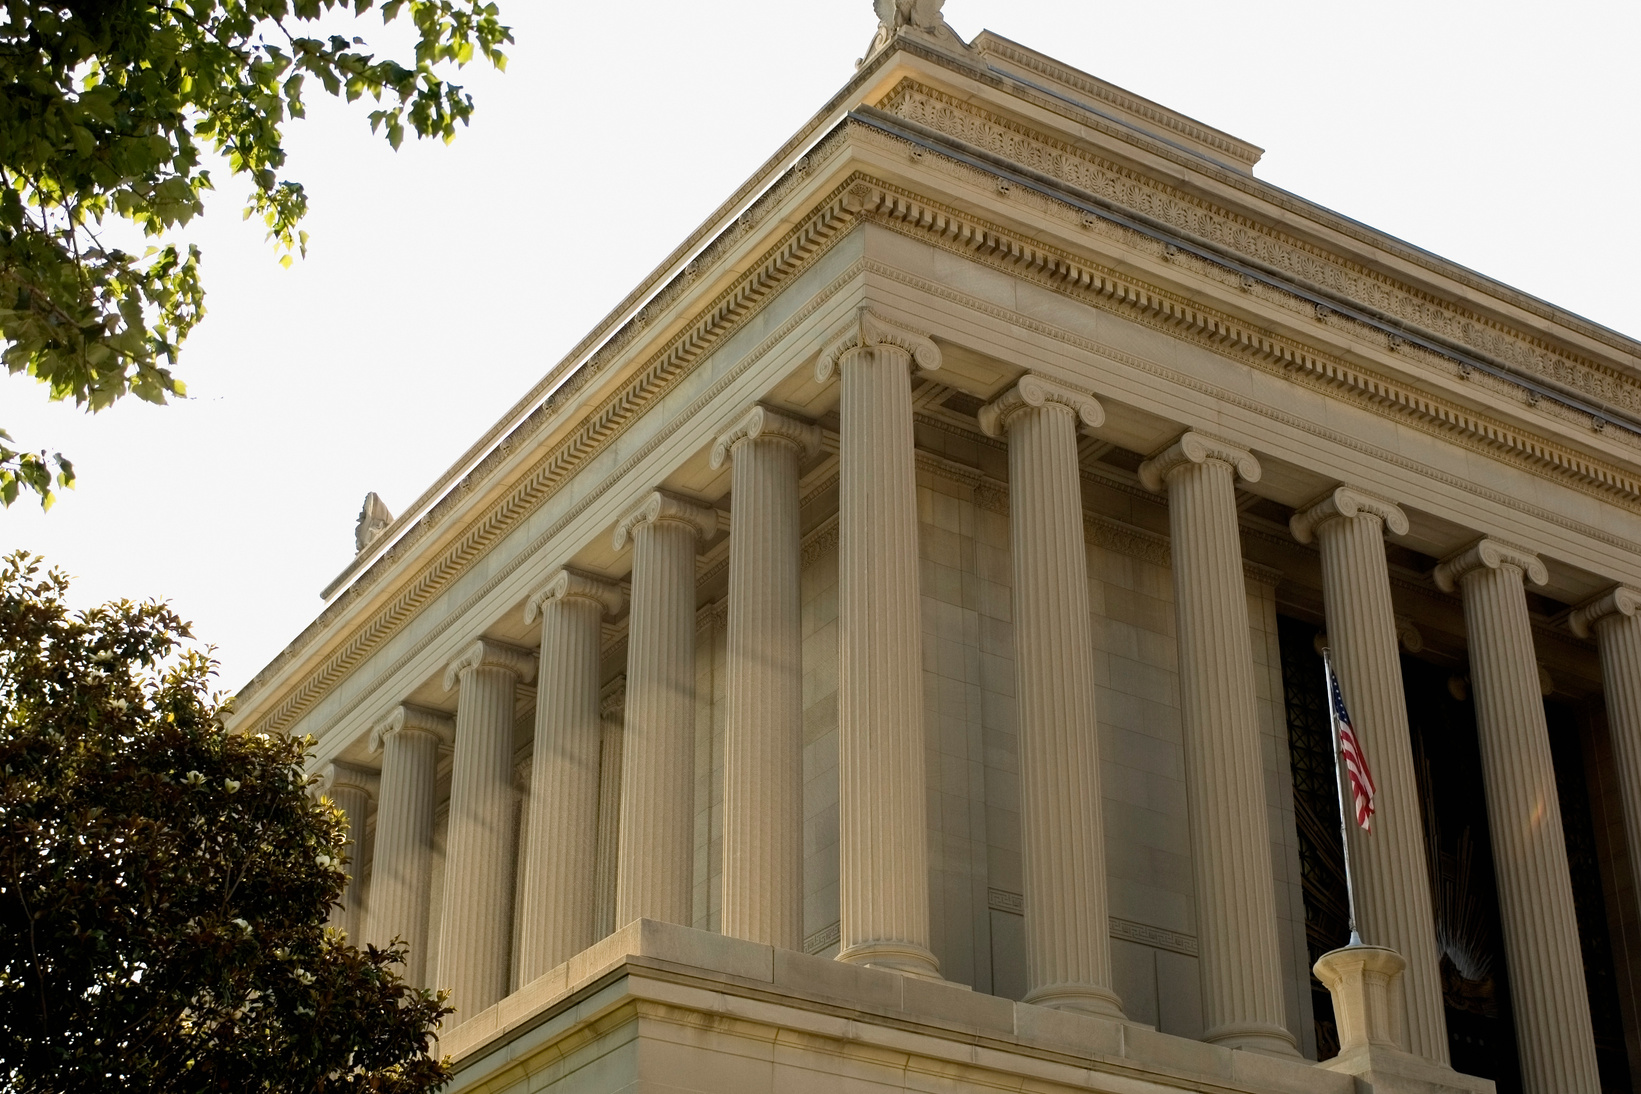 Low angle view of a government building, House of the Temple, Washington DC, USA